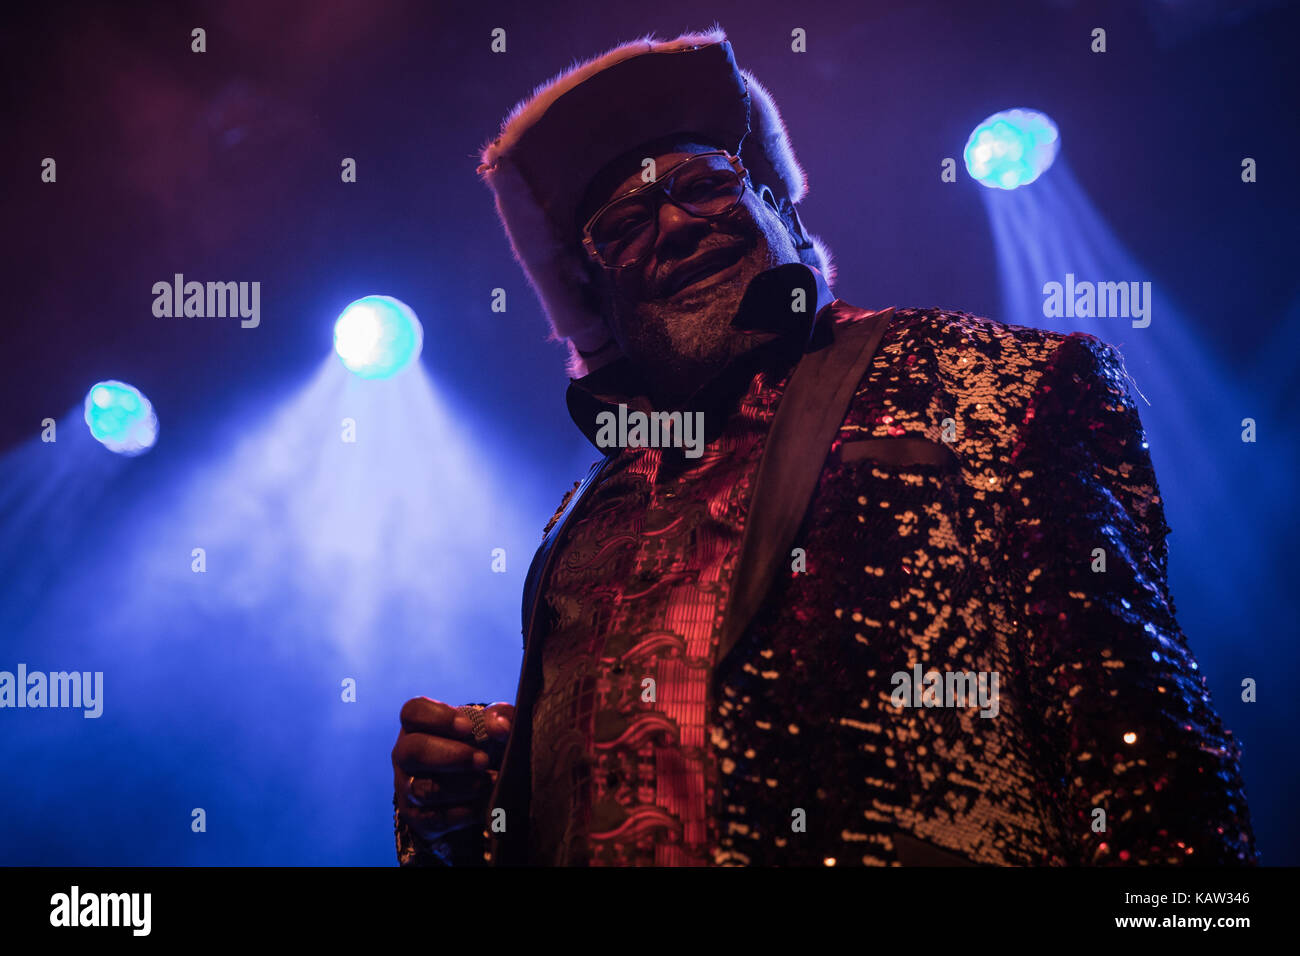 The legendary American funk singer and songwriter George Clinton performs a live concert at Rockefeller in Oslo with is P-Funk and soul band Parliament-Funkadelic. Norway, 06/07 2017. Stock Photo